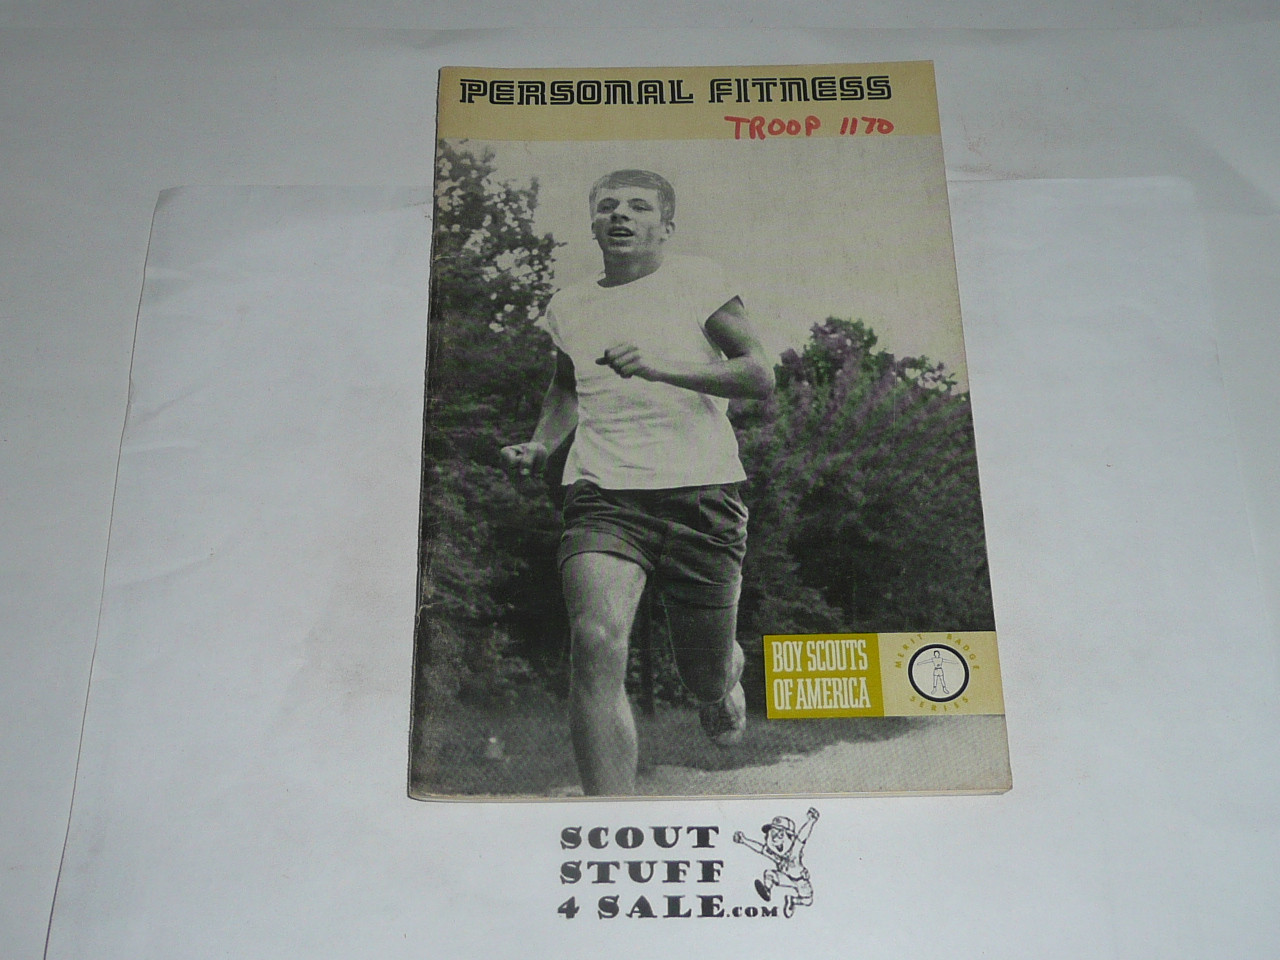 Personal Fitness Merit Badge Pamphlet, Type 8, Green Band Cover, 5-73 Printing